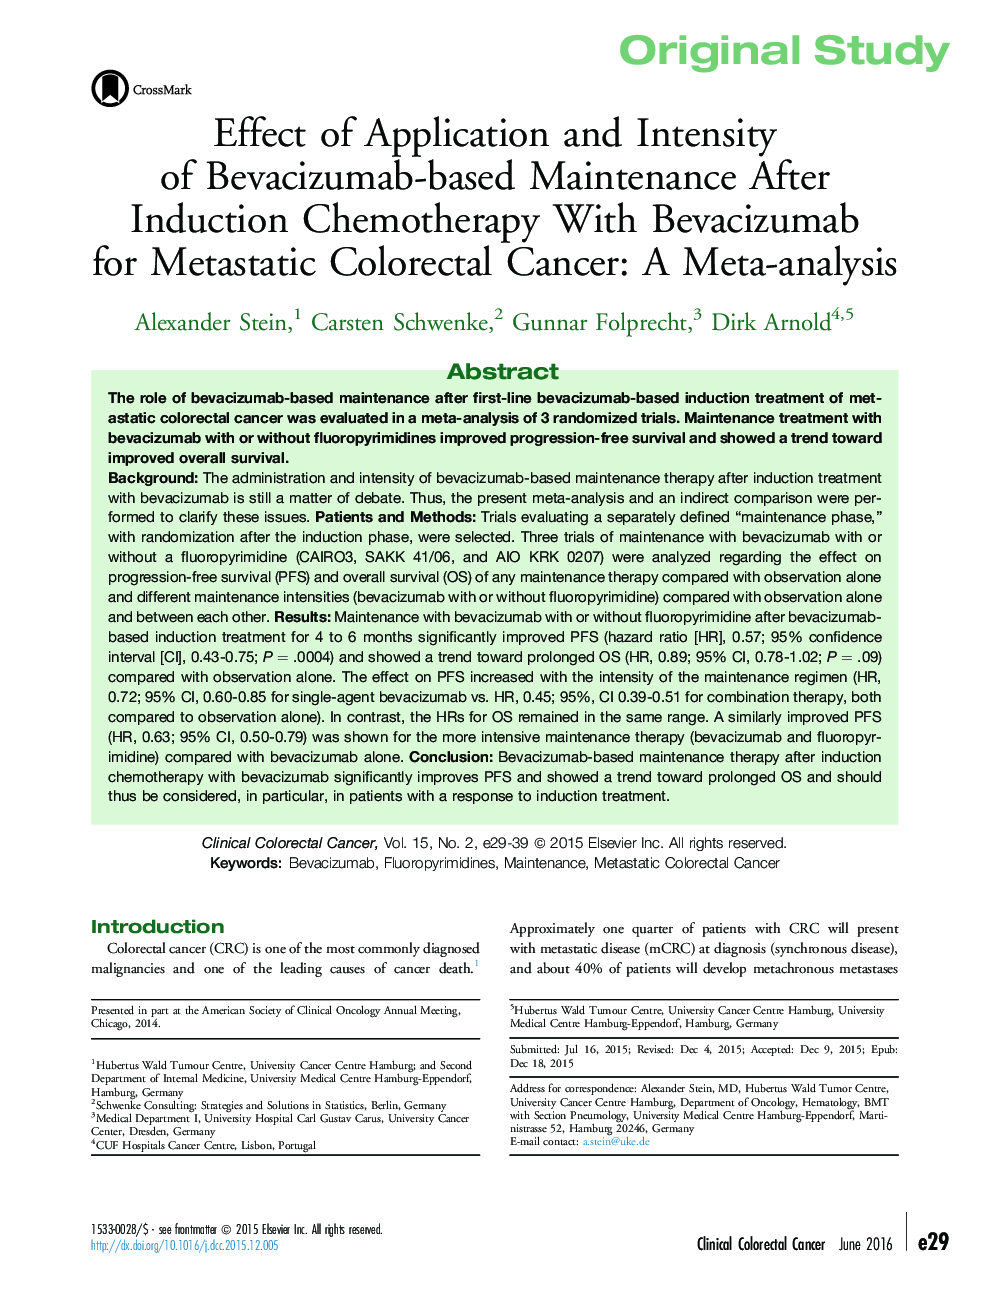 Effect of Application and Intensity of Bevacizumab-based Maintenance After Induction Chemotherapy With Bevacizumab for Metastatic Colorectal Cancer: A Meta-analysis